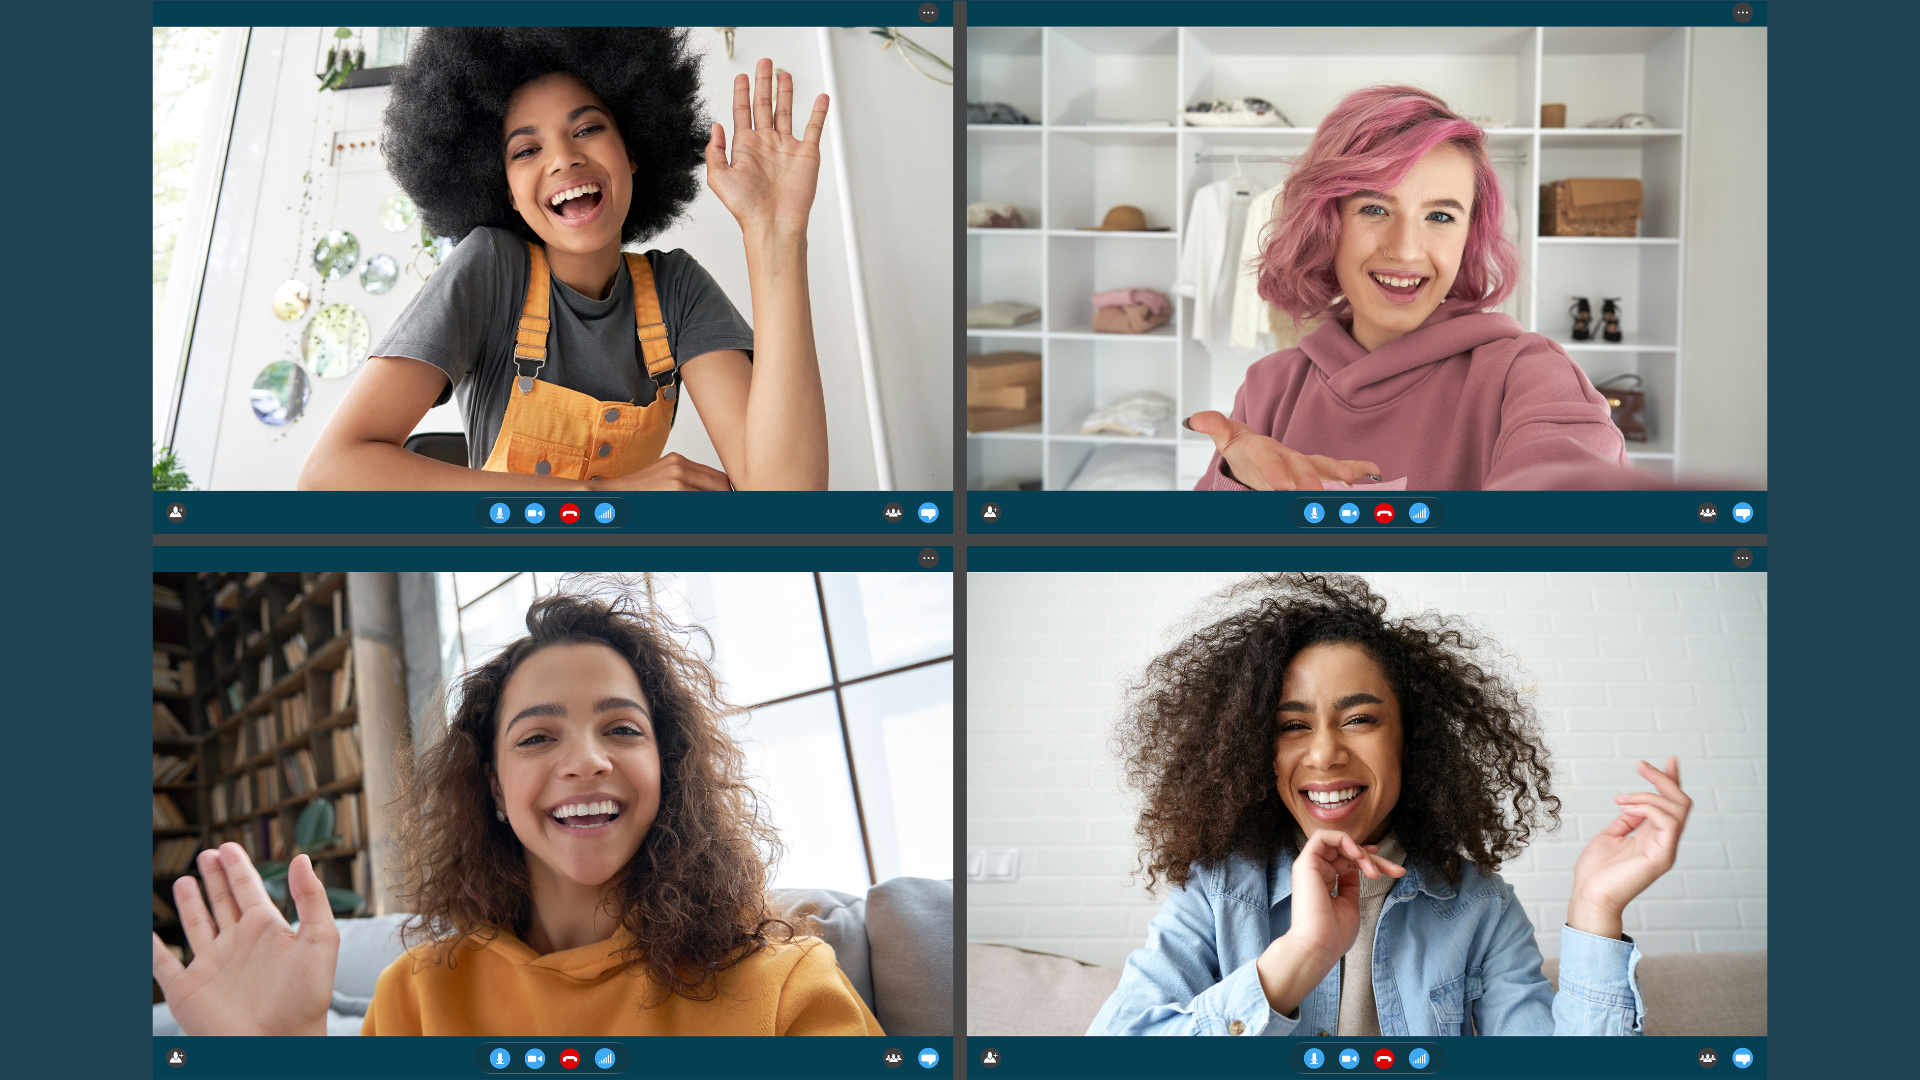 a diverse group of women engaging in meaningful conversations through virtual platform. It reflects connection, support, and the power of community in sustaining commitment and overcoming challenges.